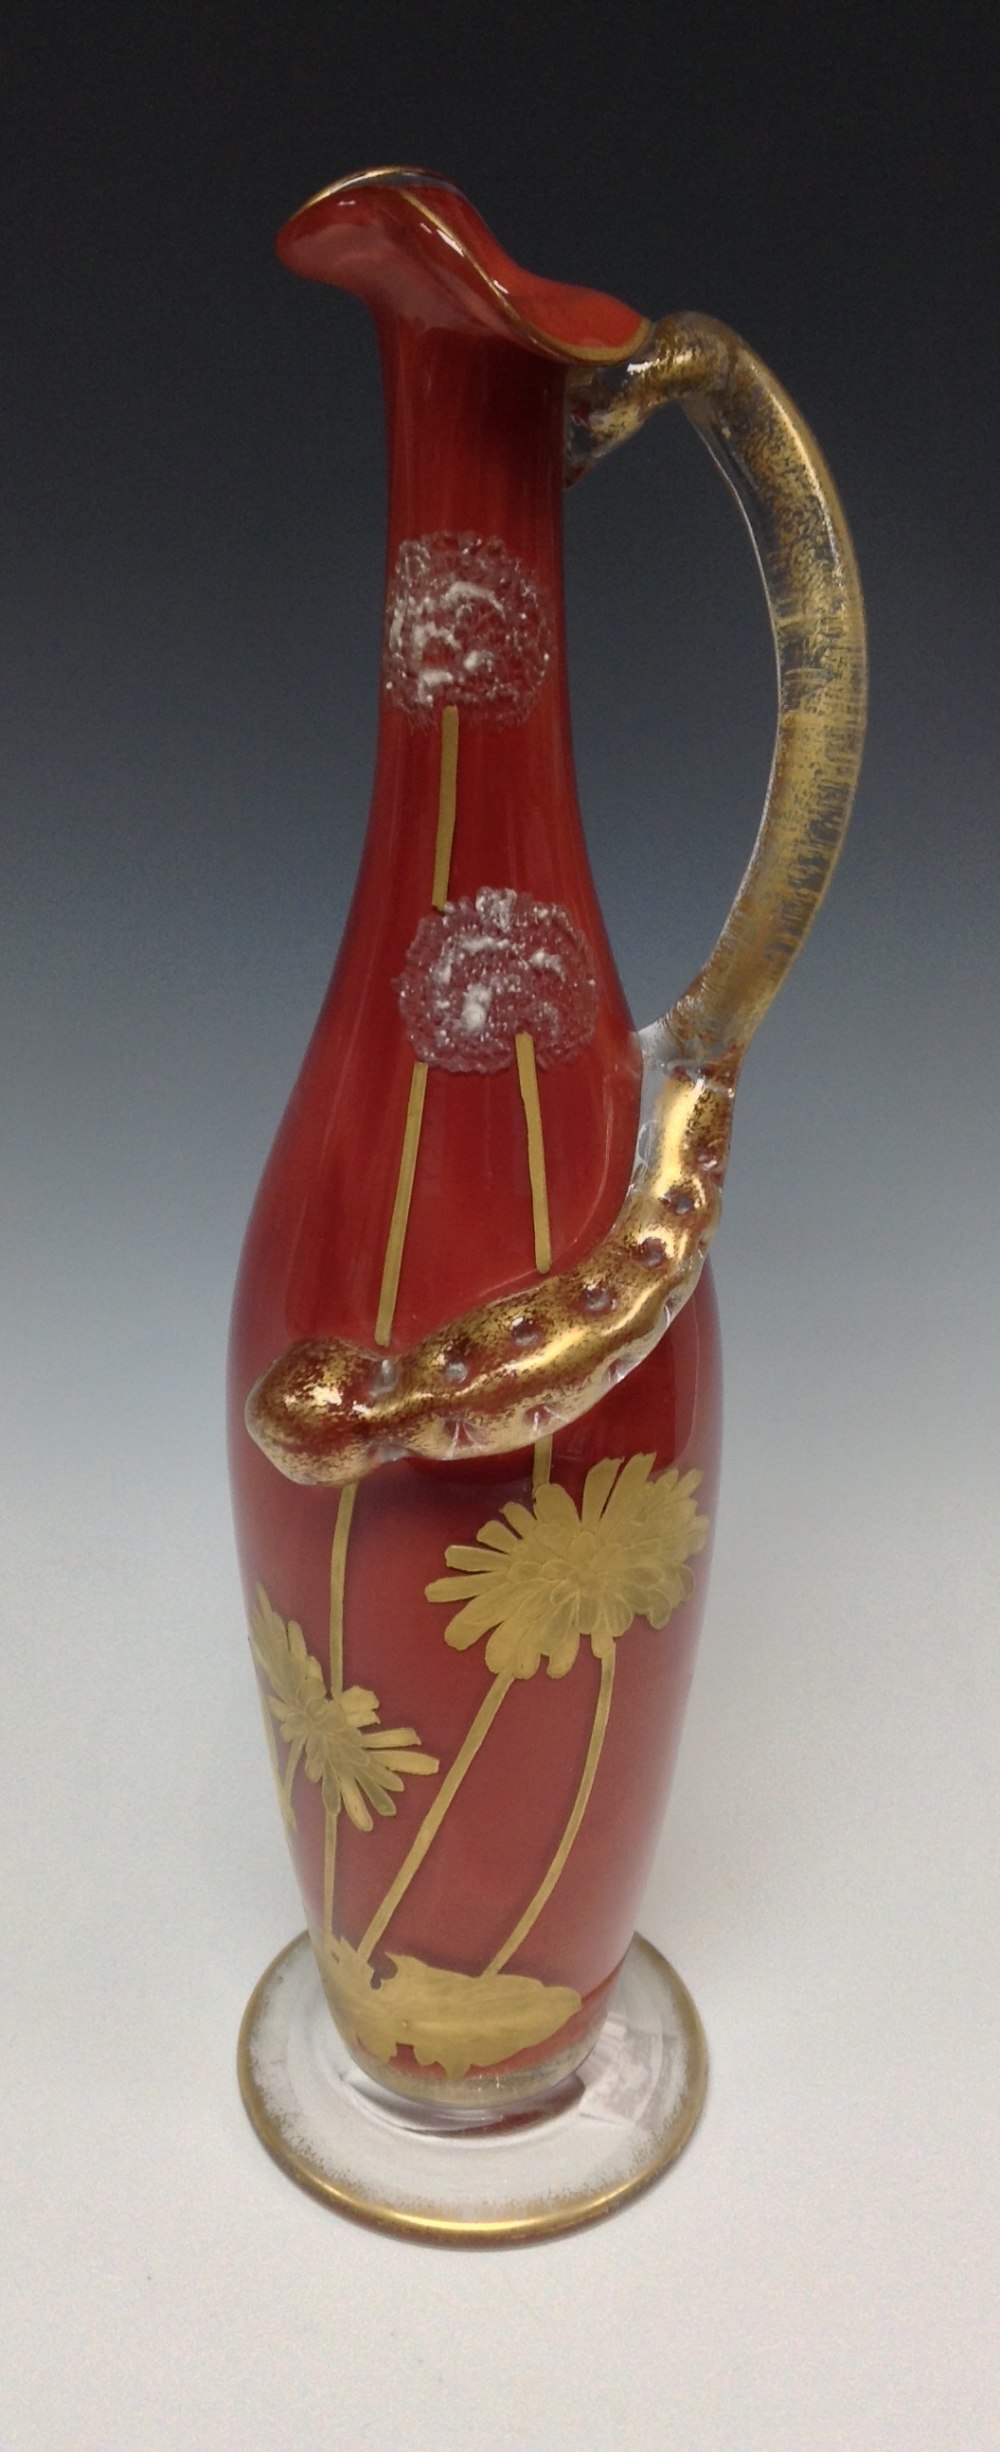 A sang-de-boeuf ewer glass vase, decorated with enamel and gilt flowers, glass snake handle, 22cm